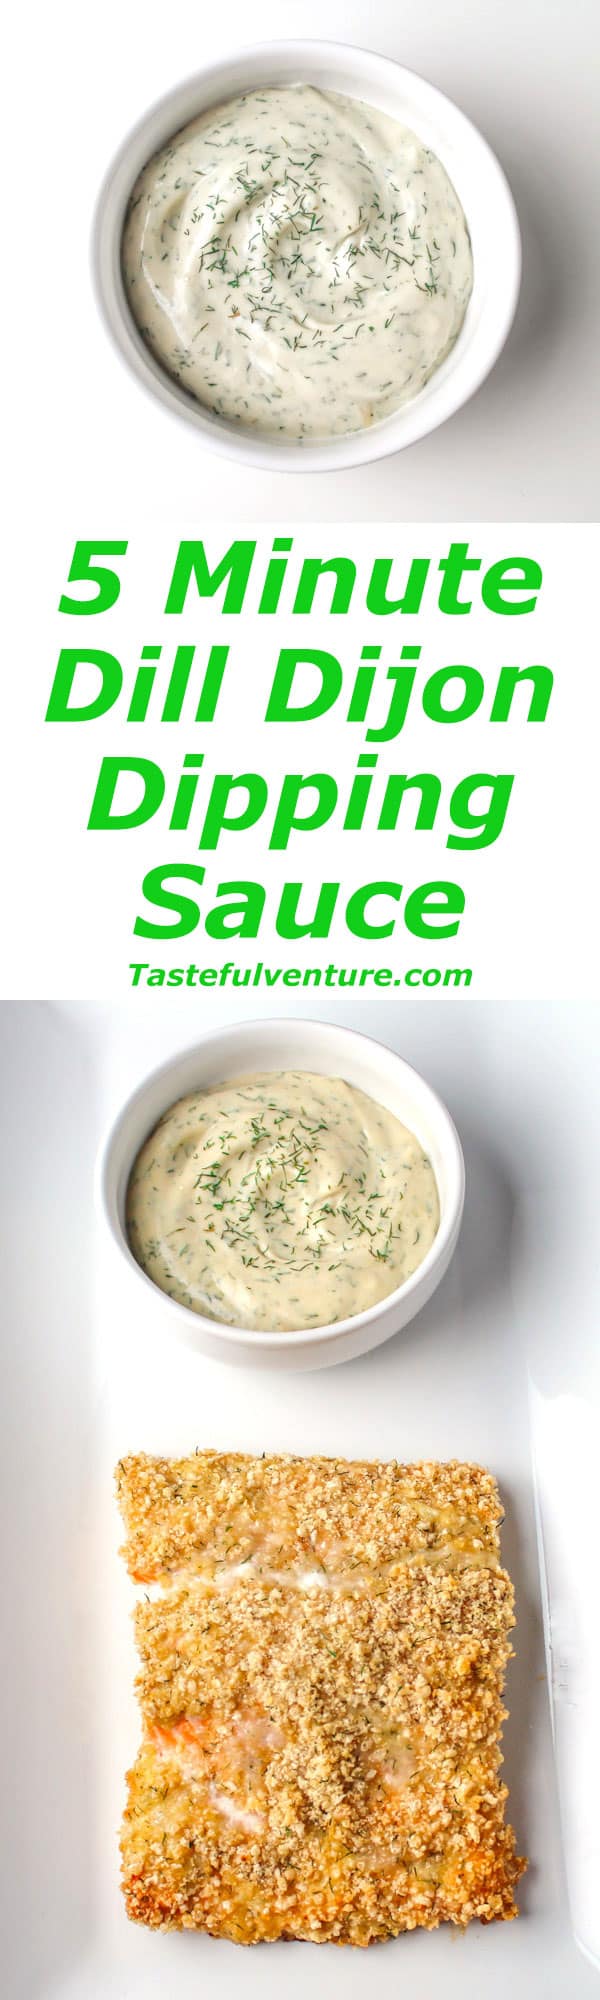 Dill Dijon Dipping Sauce that can be made in 5 Minutes, this is Dairy Free and Gluten Free too! | Tastefulventure.com